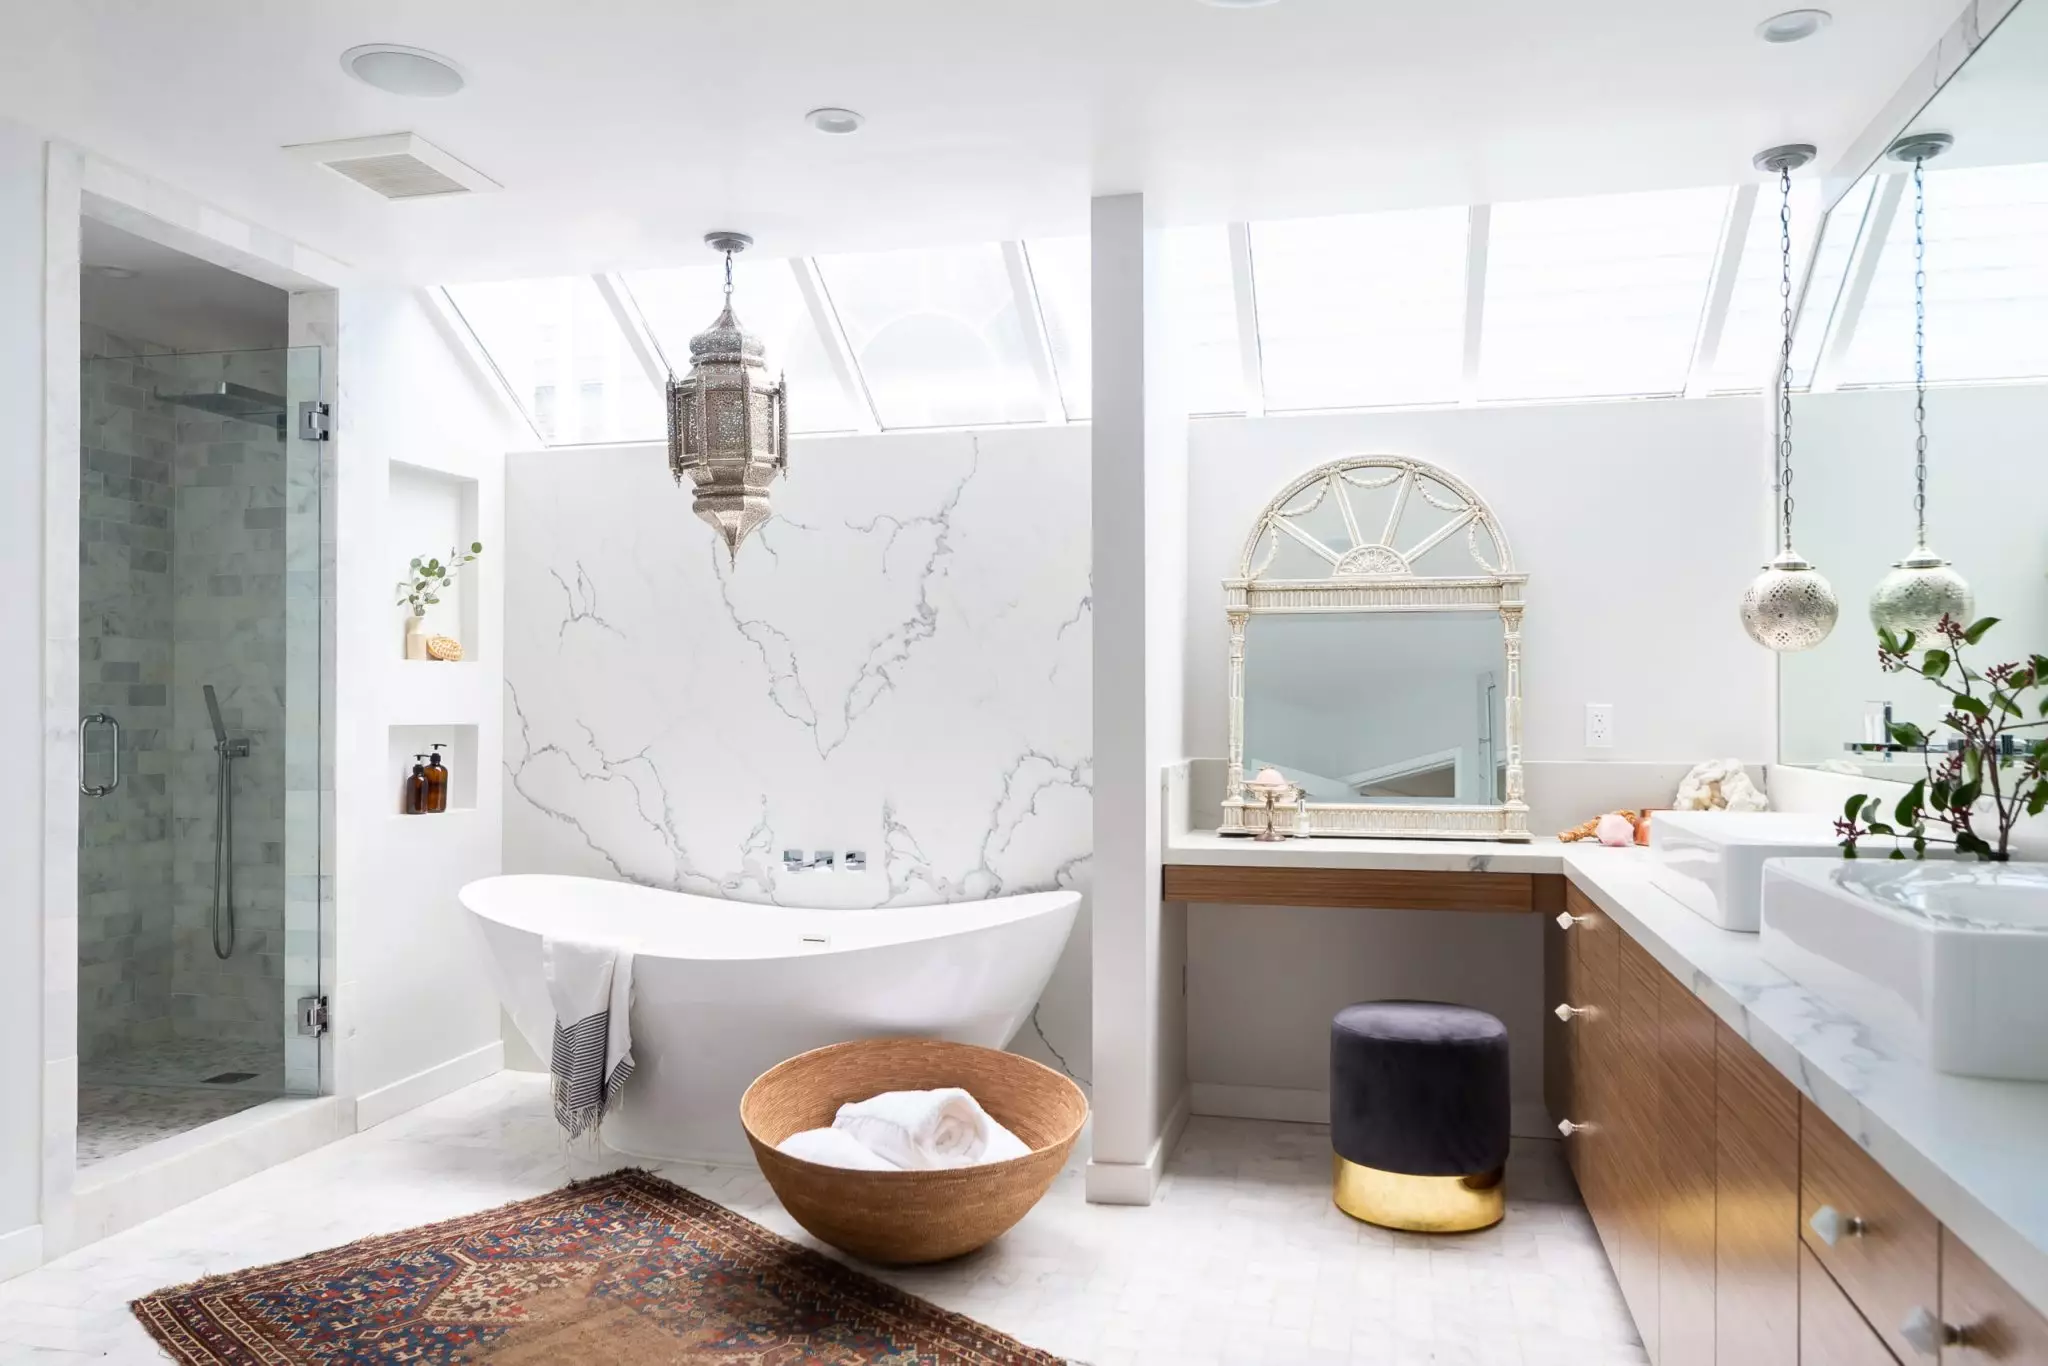 Choosing The Perfect Bathtub, Shower, And Sink for Your Home